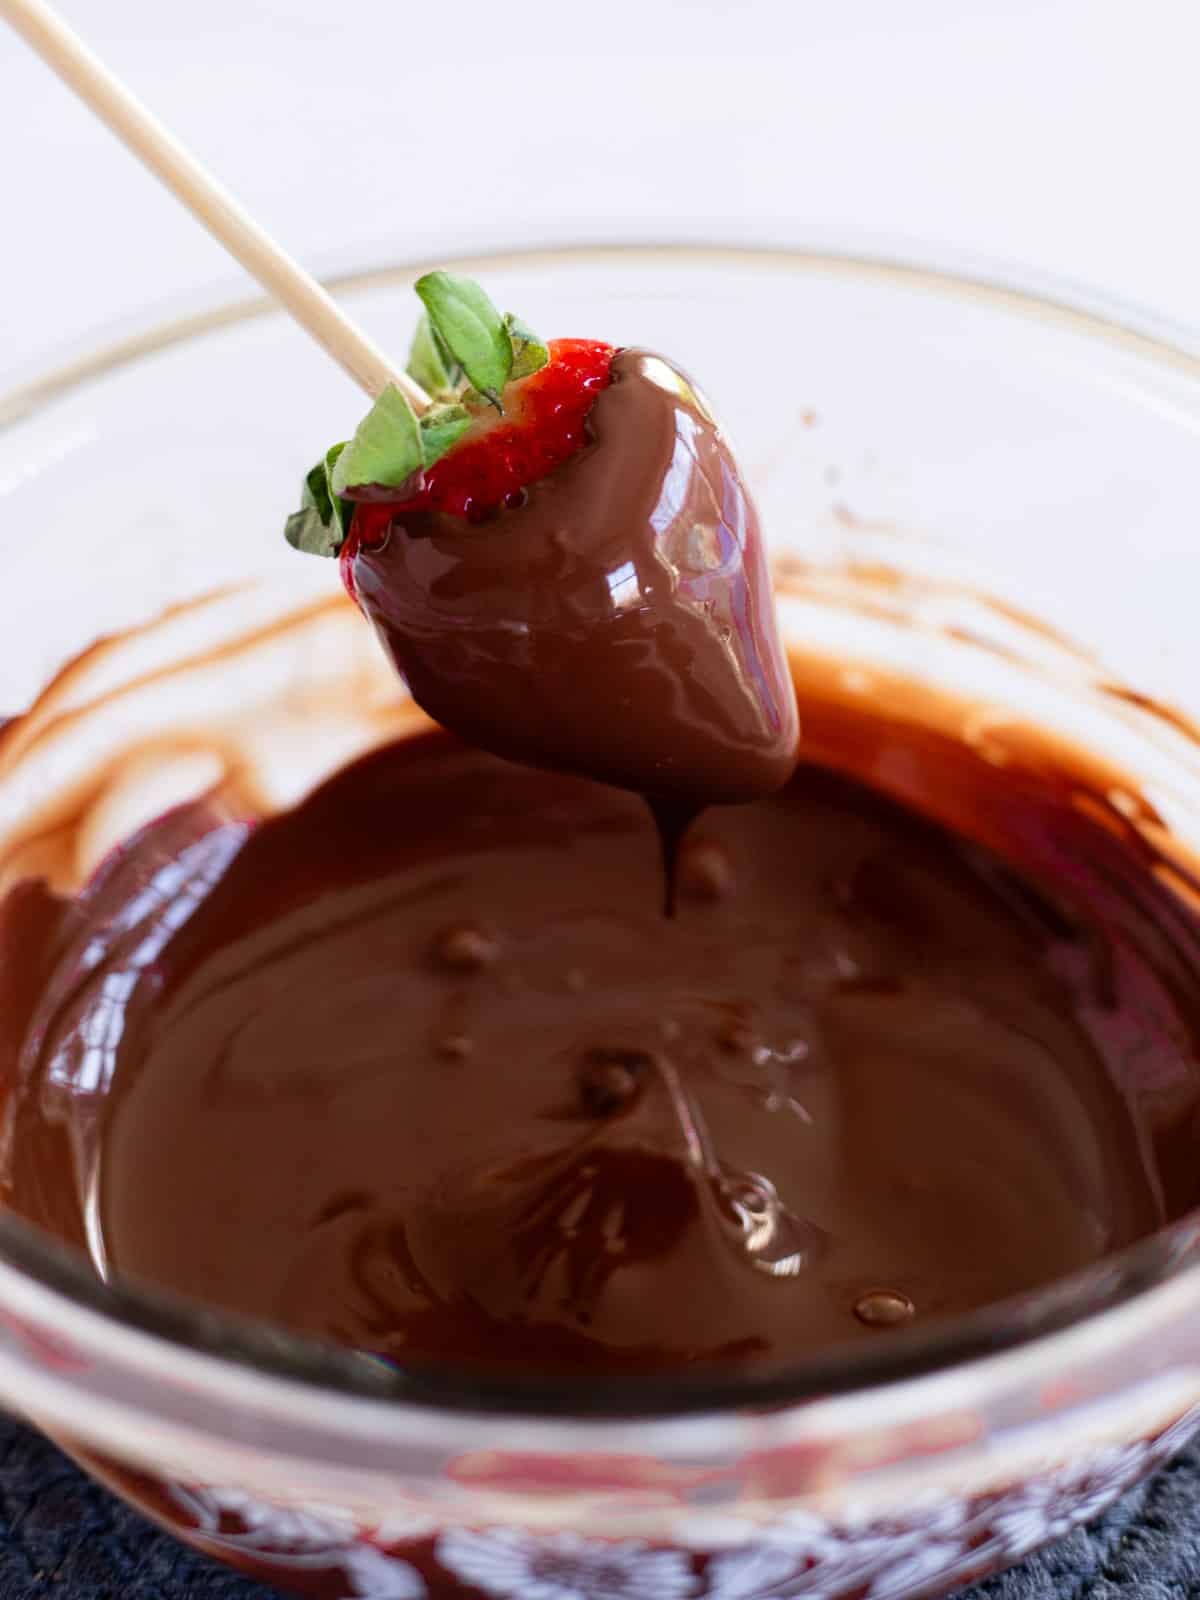 a strawberry on a stick dipped in melted chocolate.